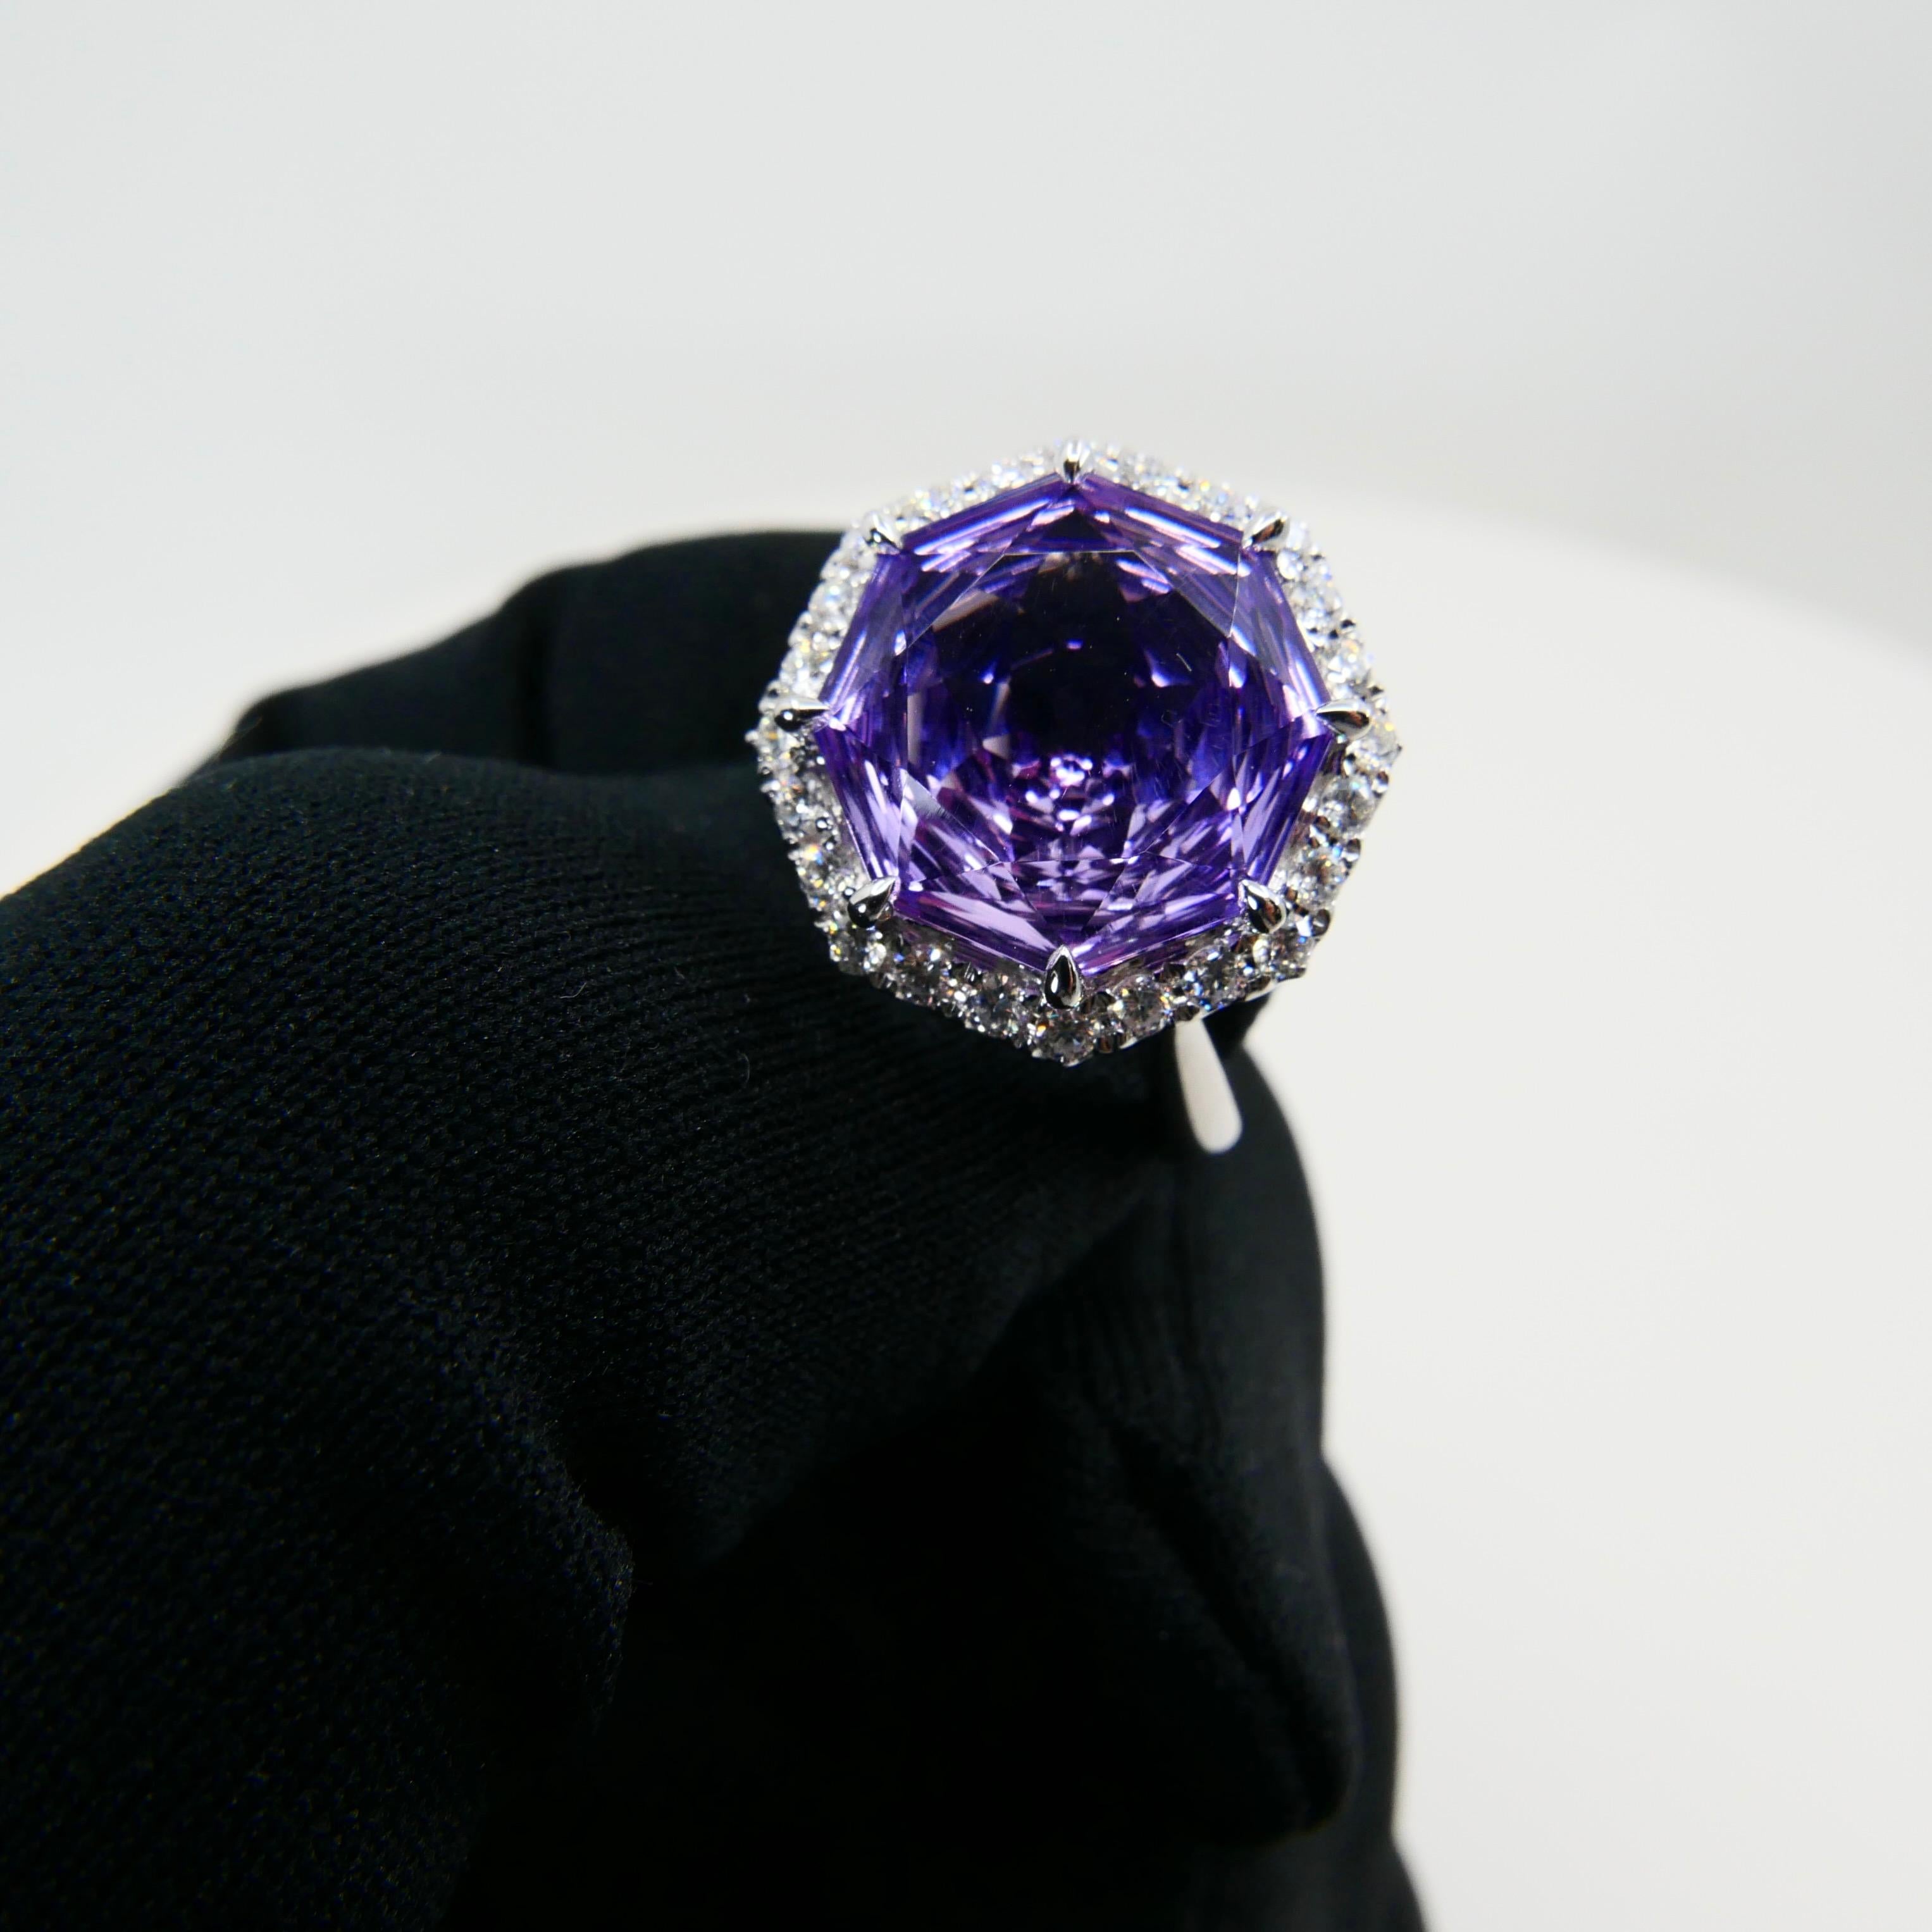 5.32 Carat Flower Cut Amethyst and Diamond Cocktail Ring, Statement Ring 8